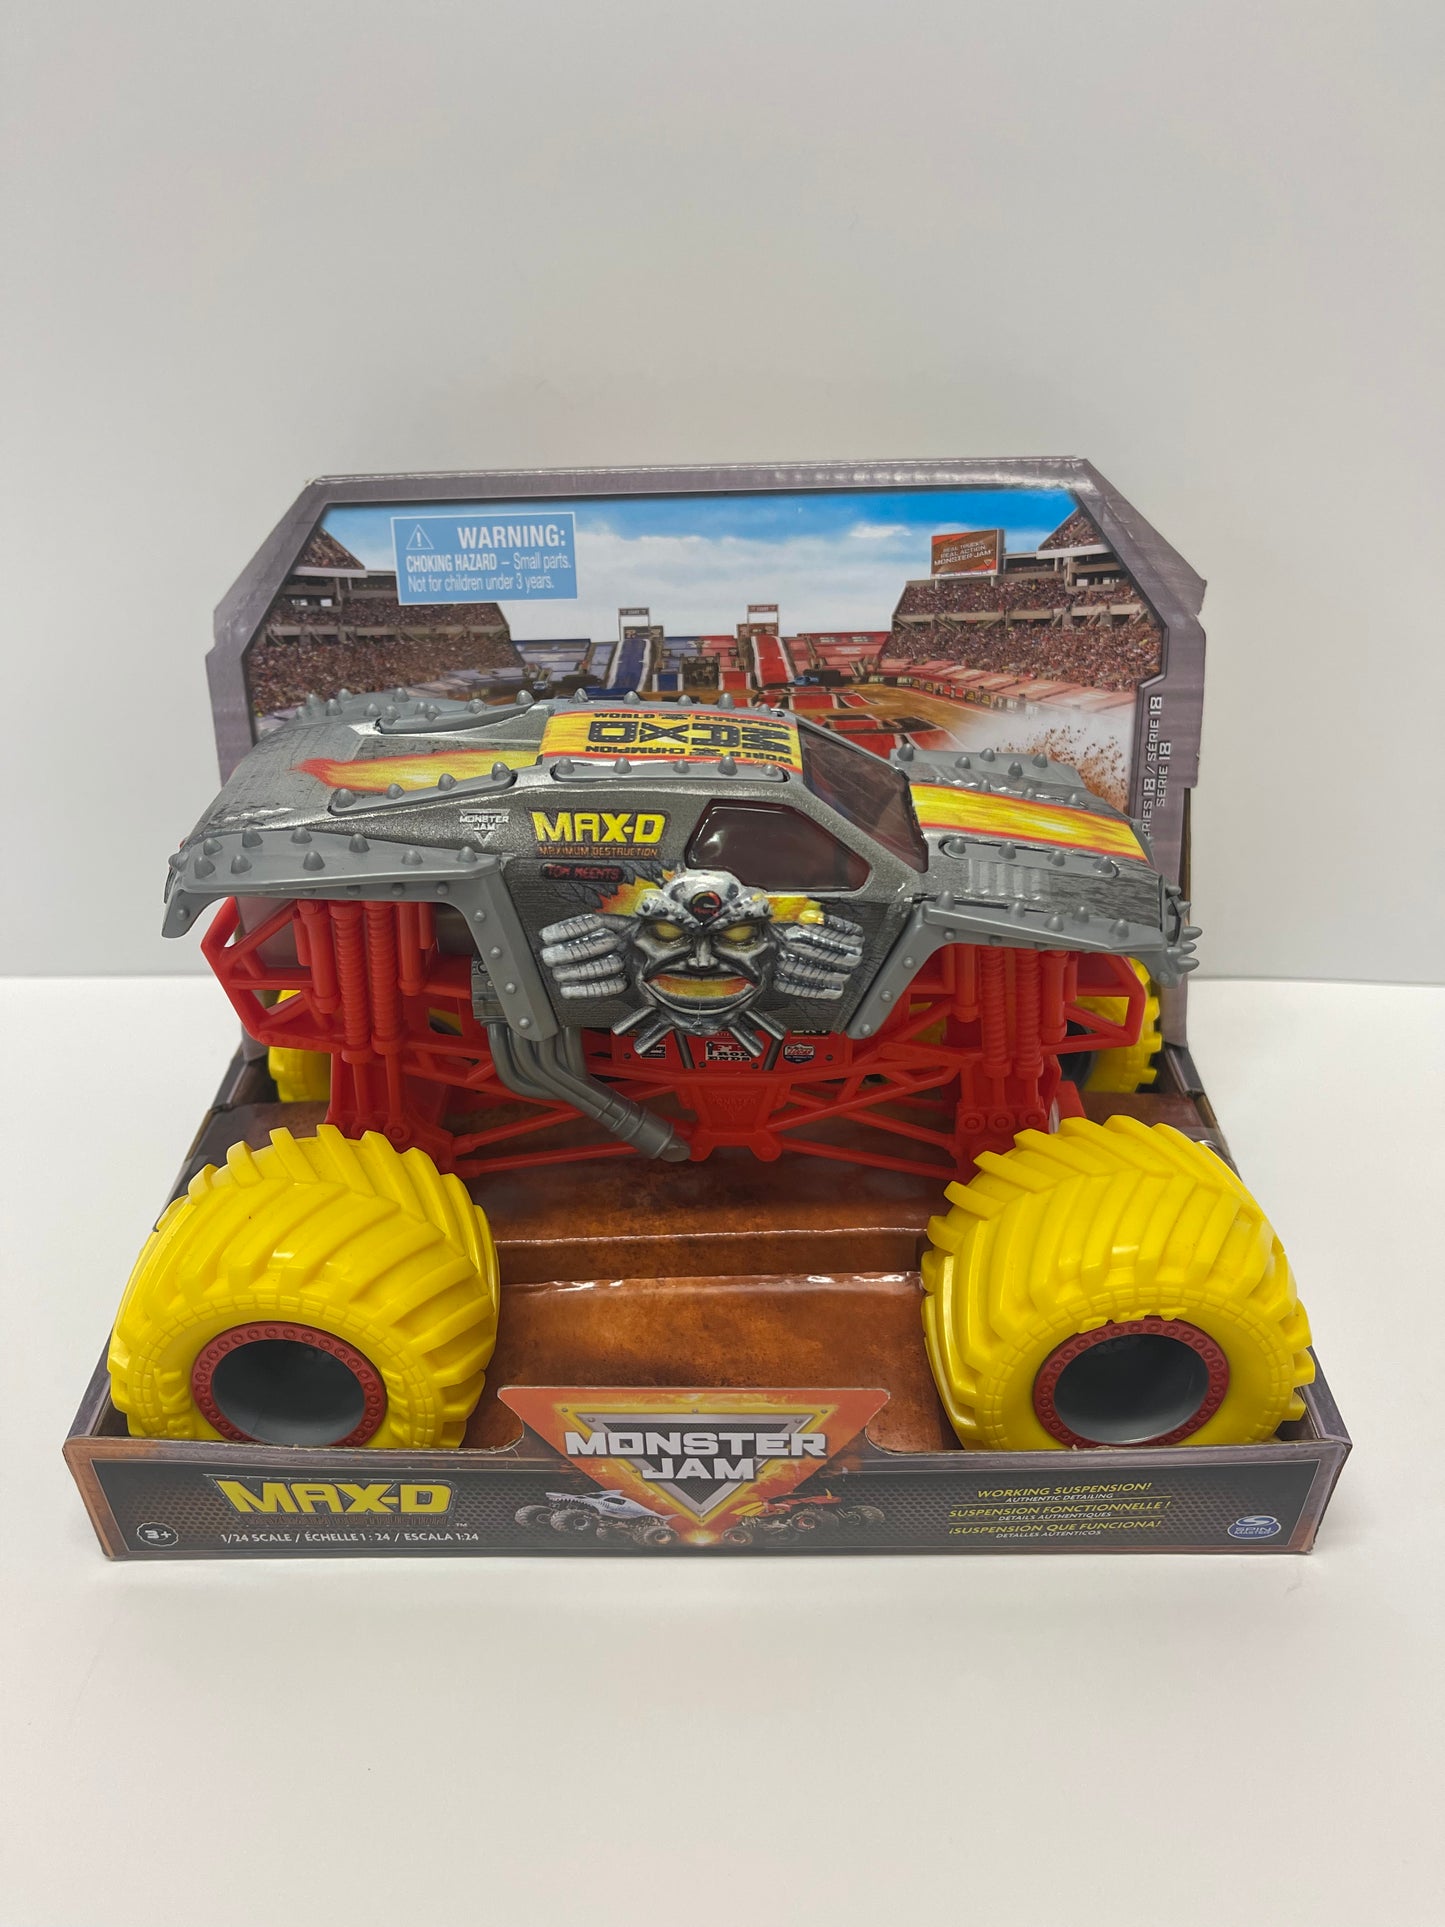 Monster Jam 1:24 Scale Collector Diecast Truck -TAKE YOUR PICK!